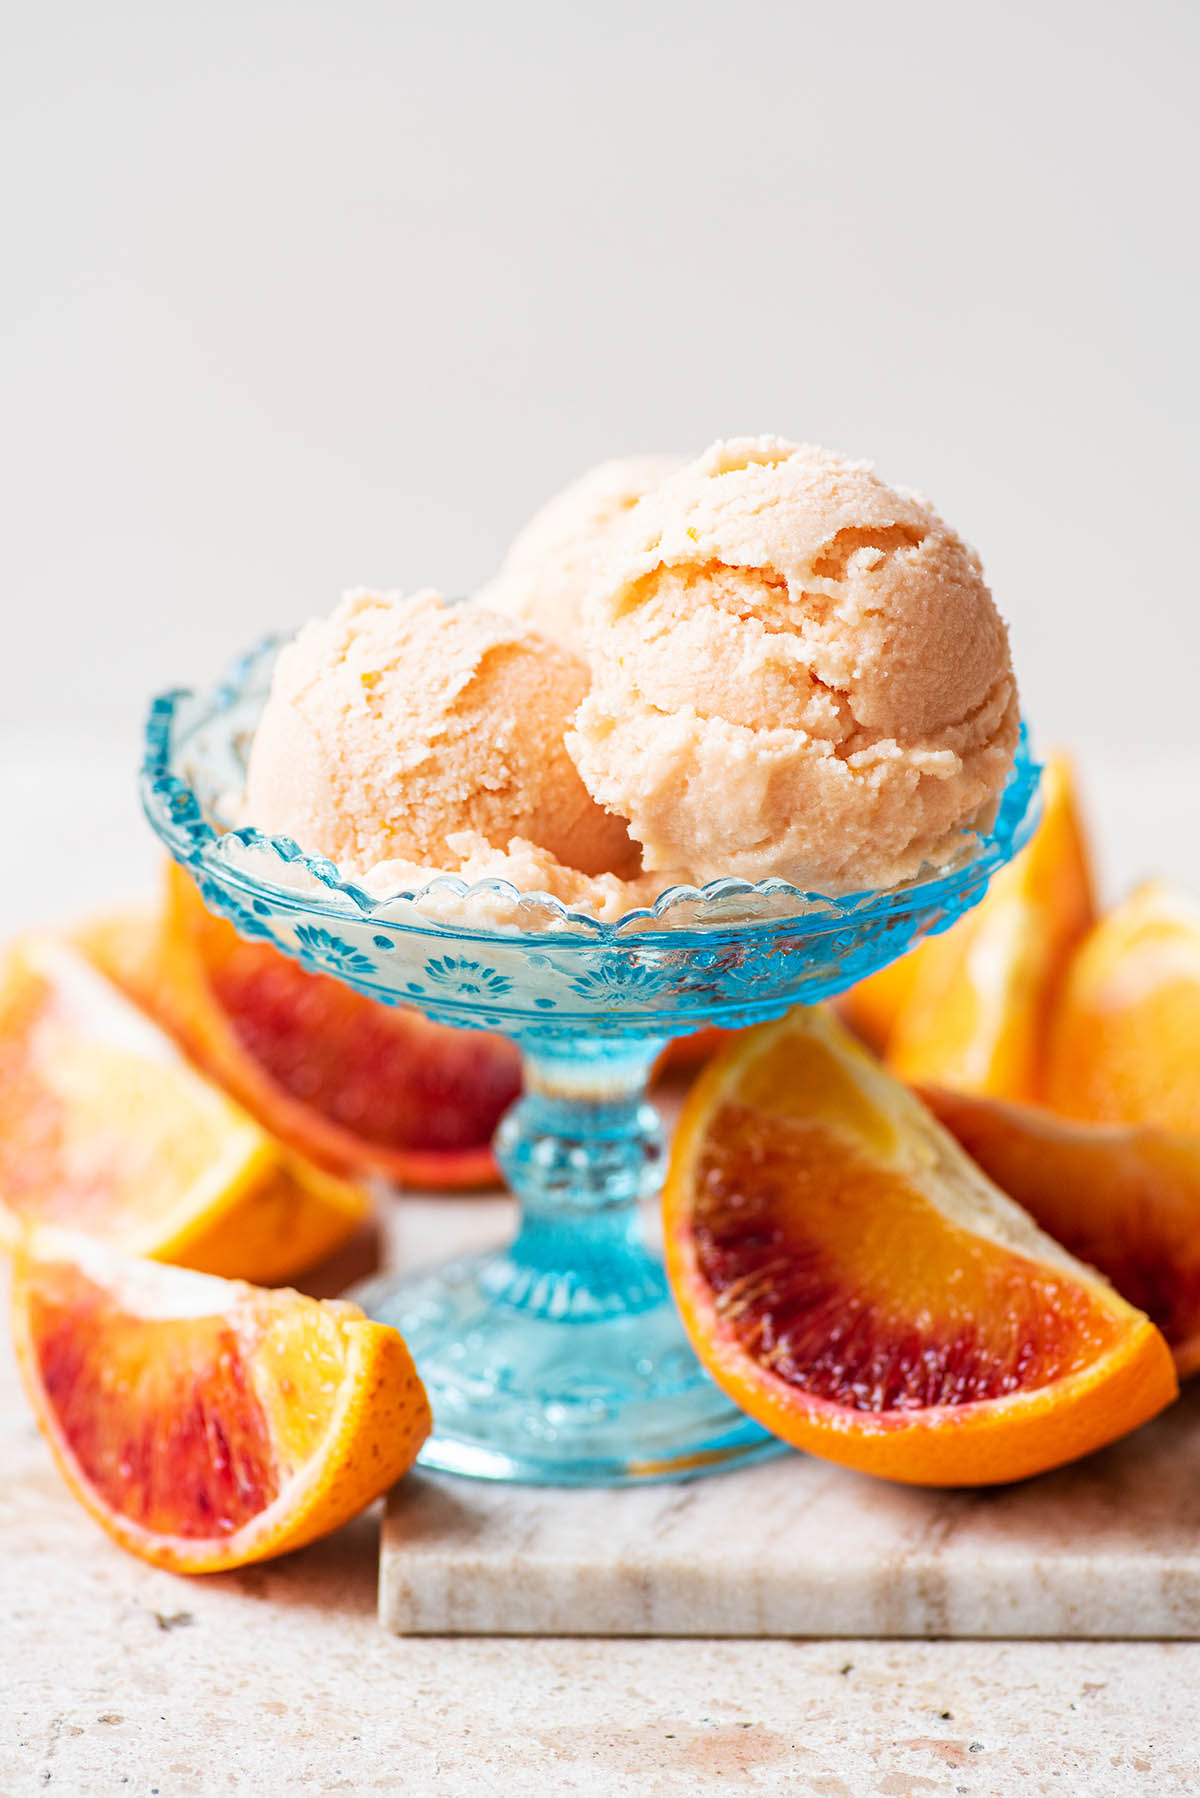 Three scoops of sherbet in a coupe glass with orange slices around.